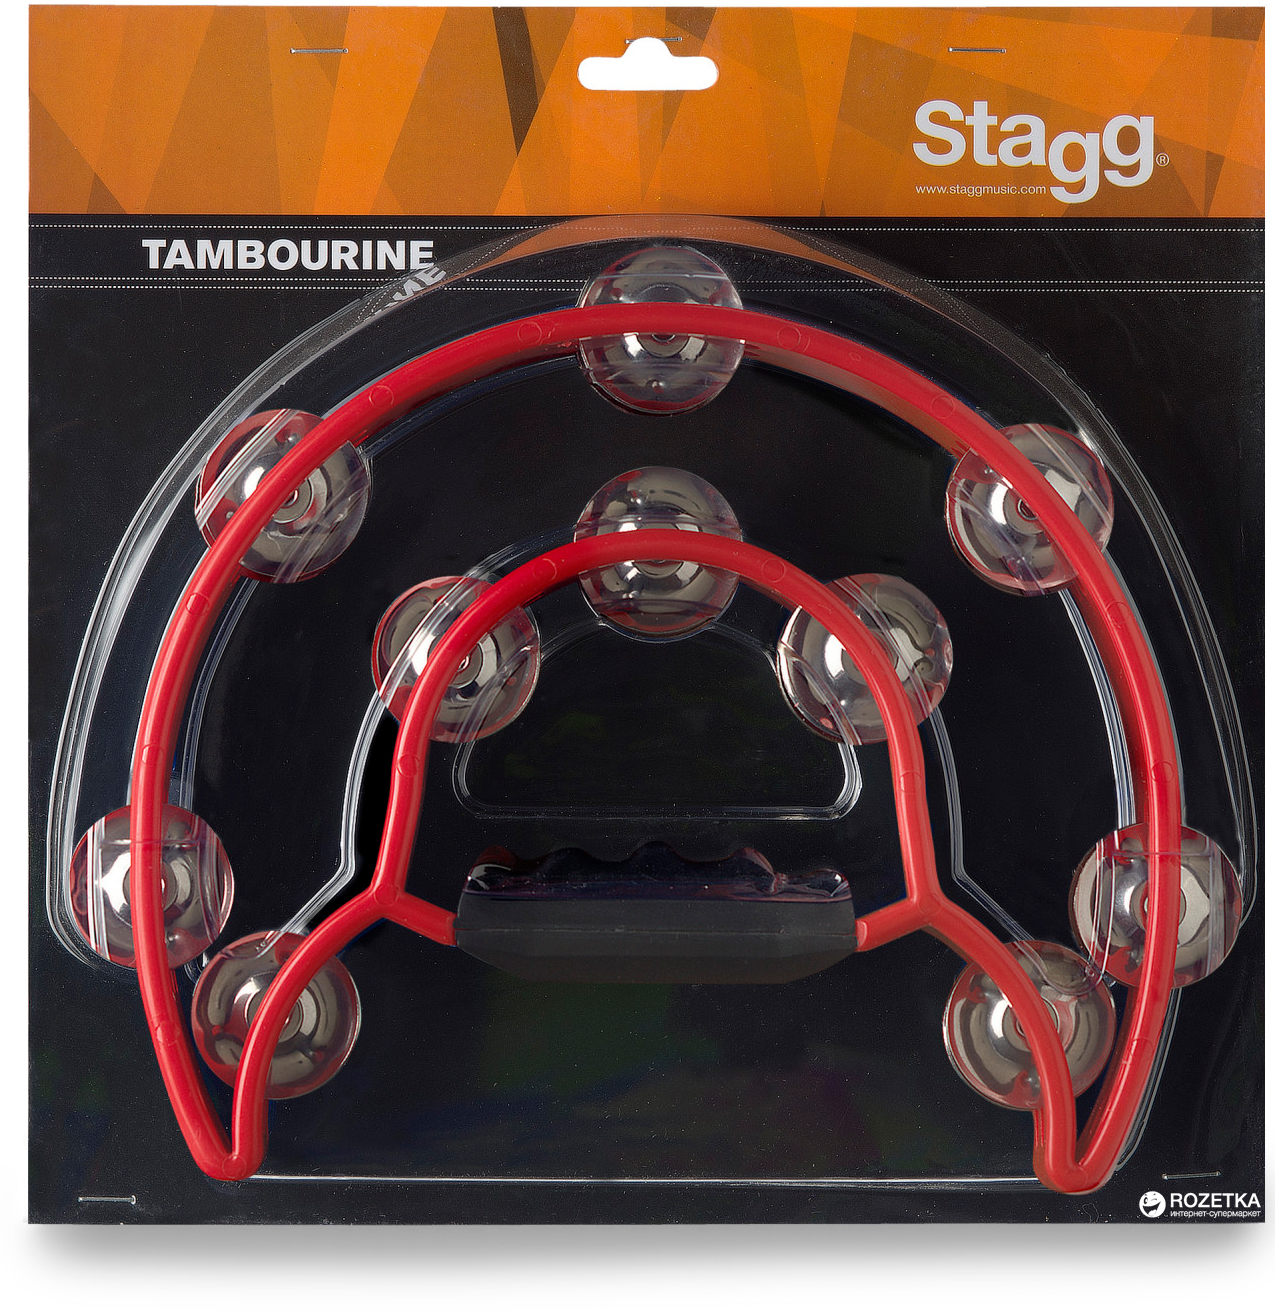 Stagg Tab-1 Rd Tambourin En Plastique Avec 20 Cymbalettes Rouge - Shake percussion - Variation 1